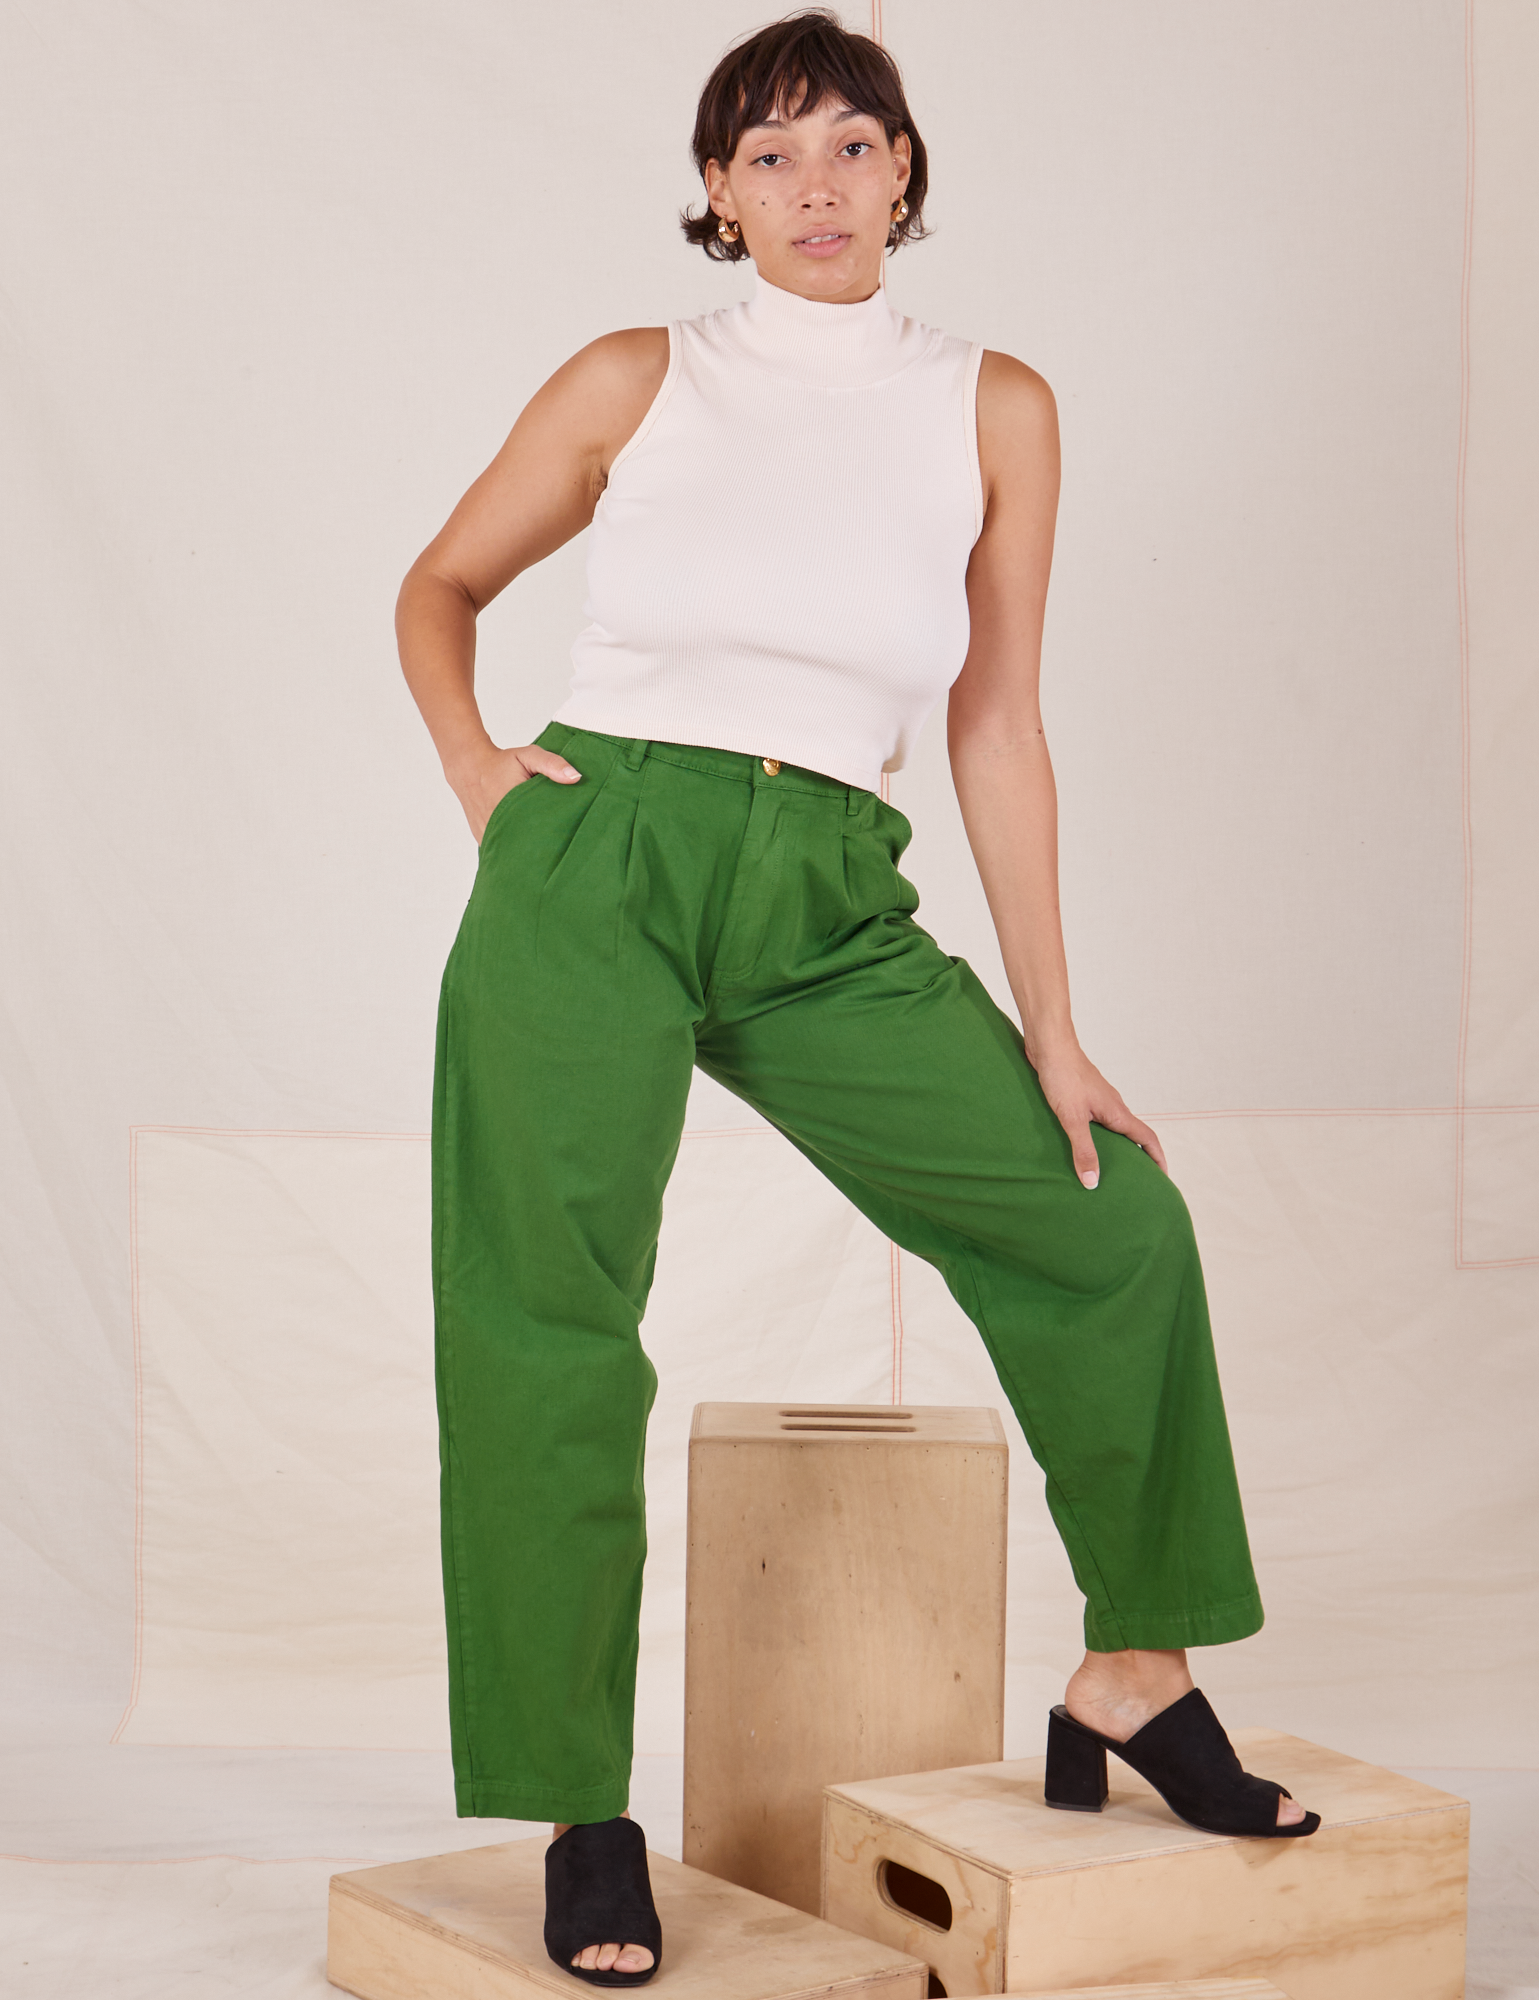 Tiara is 5&#39;4&quot; and wearing S Heavyweight Trousers in Lawn Green paired with vintage off-white Sleeveless Turtleneck